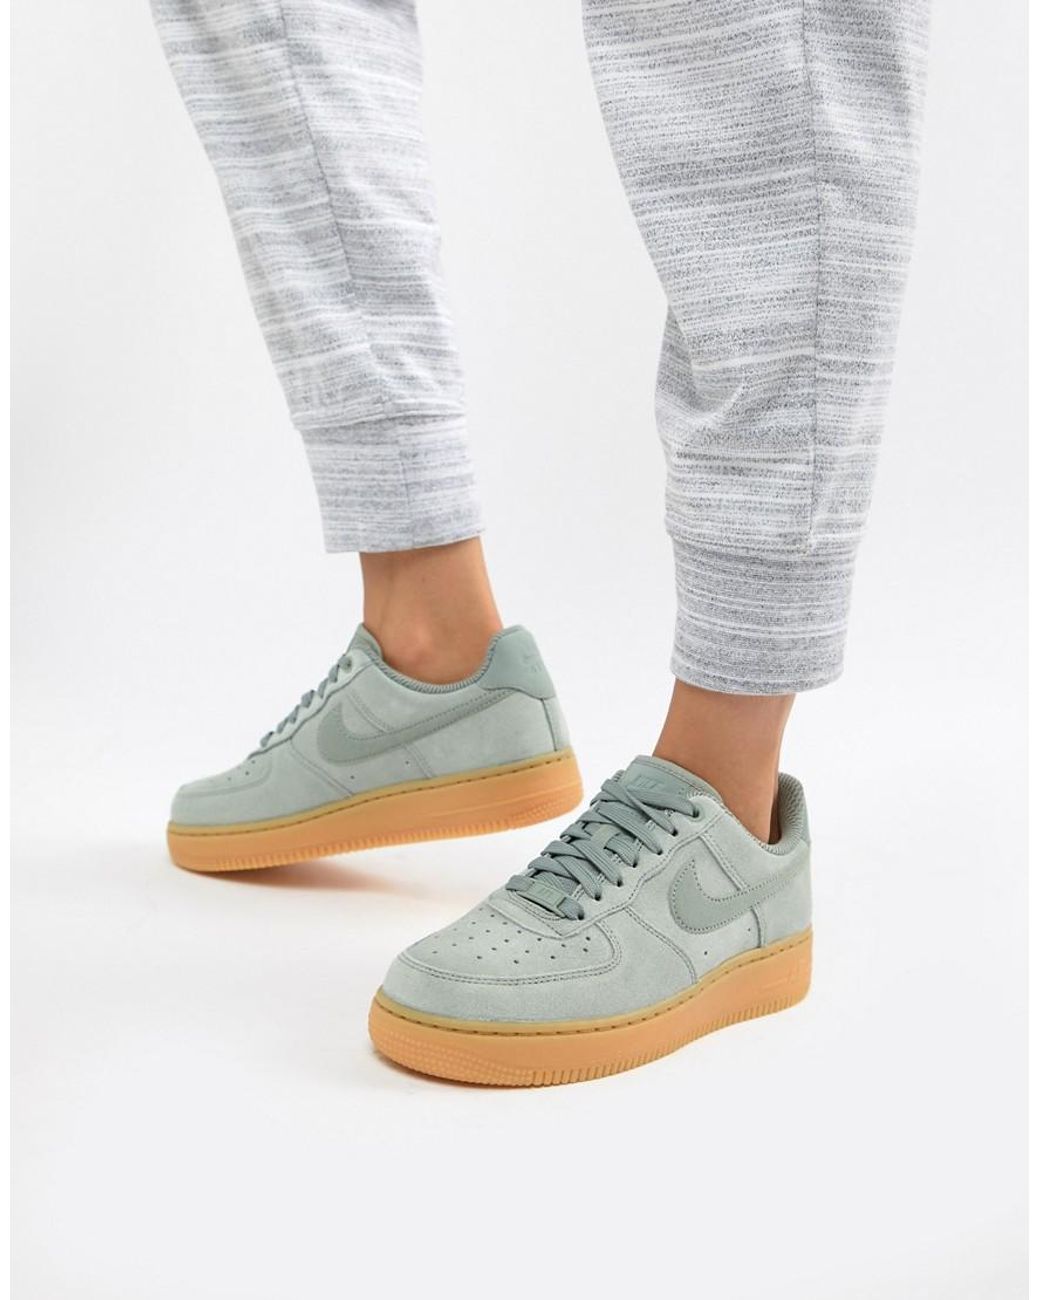 Nike Green Air Force 1 Sneakers With Gum Sole | Lyst